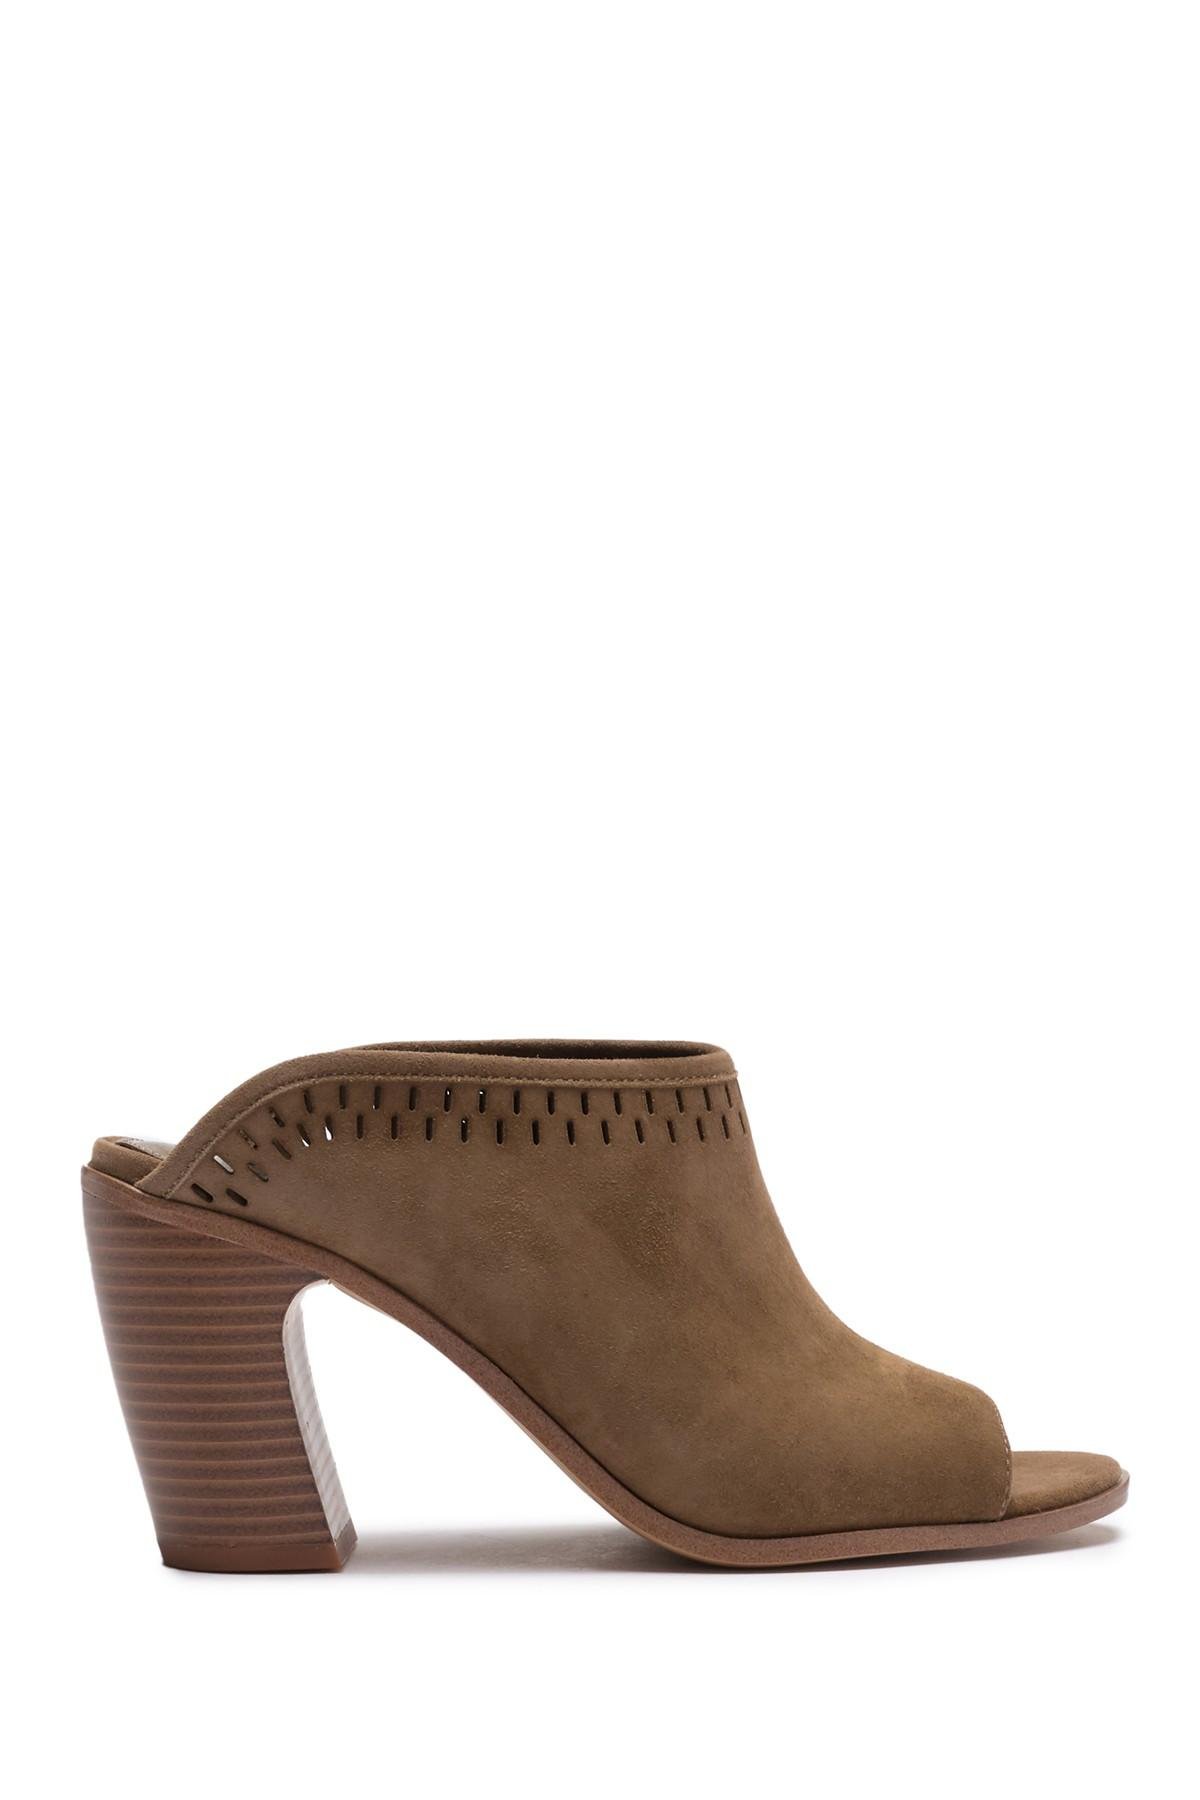 Vince Camuto Merlyna Suede Mule in 